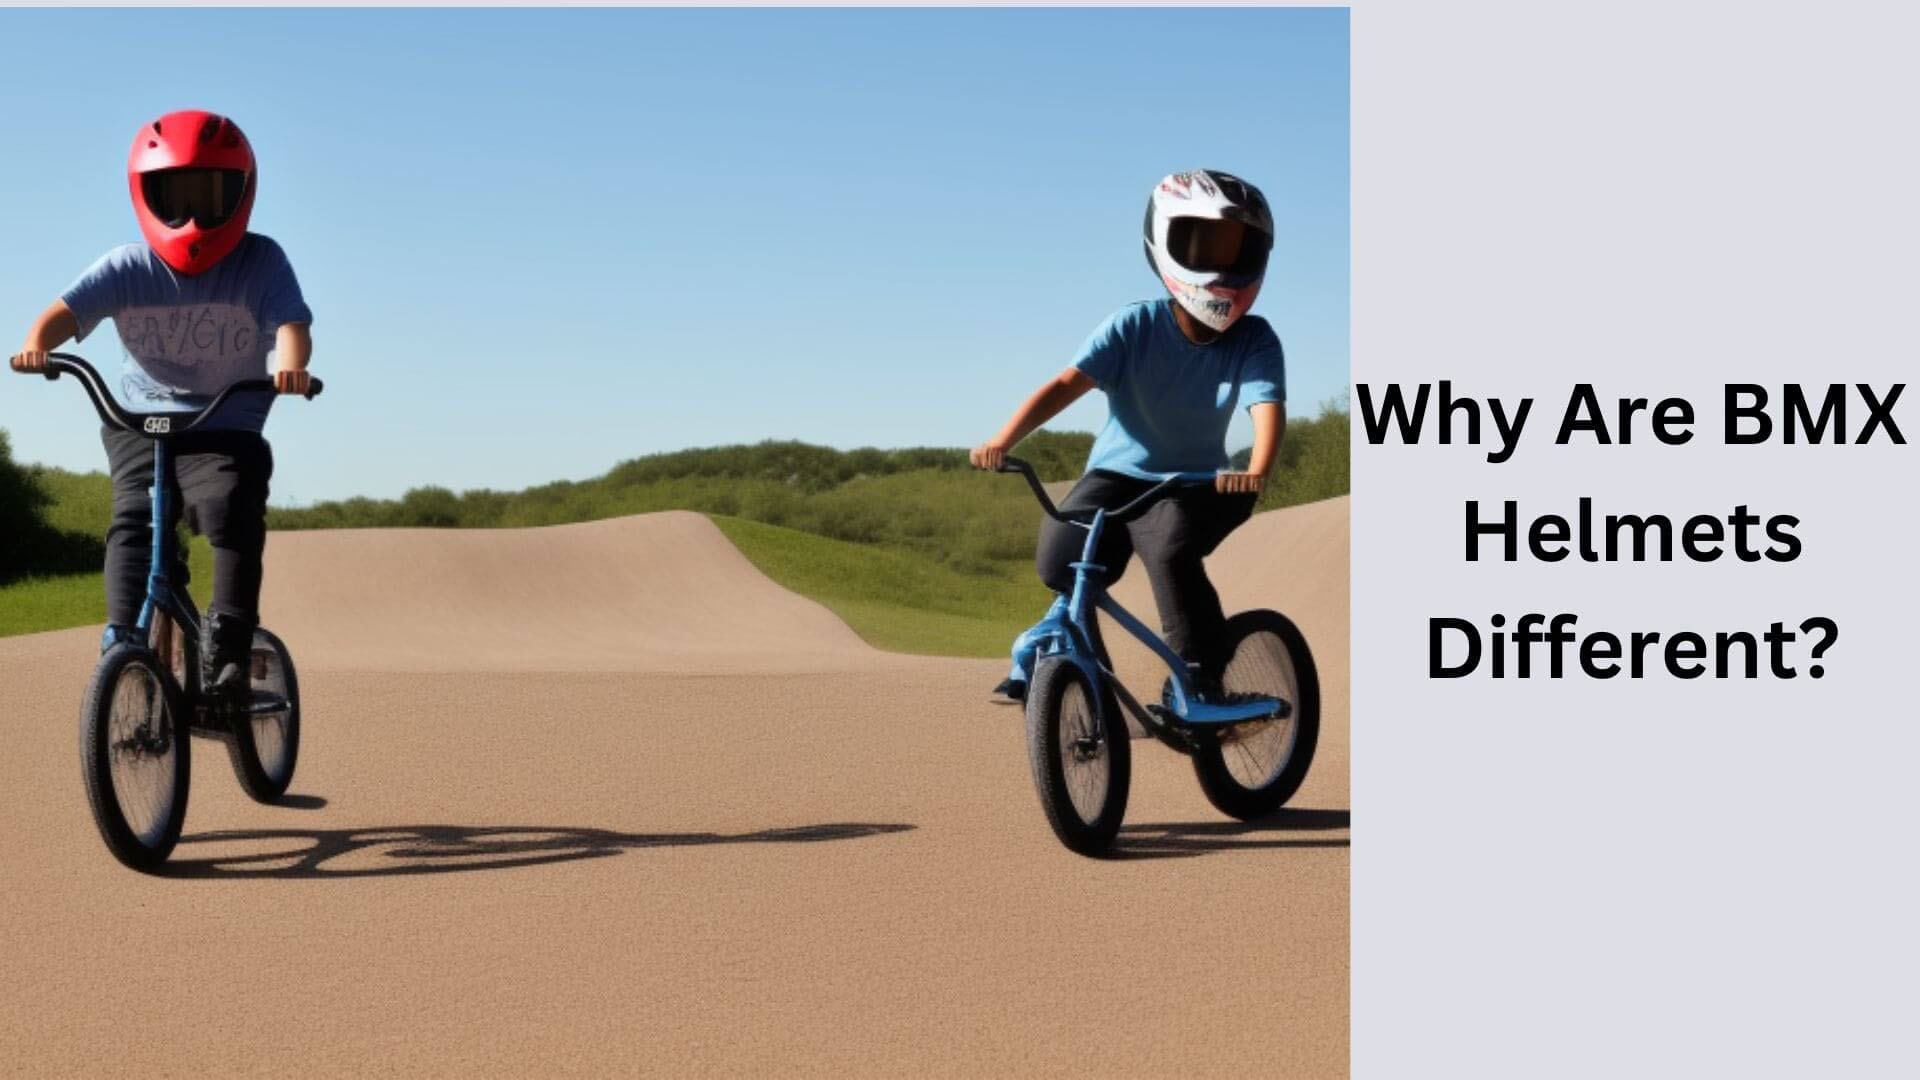 Why Are BMX Helmets Different?